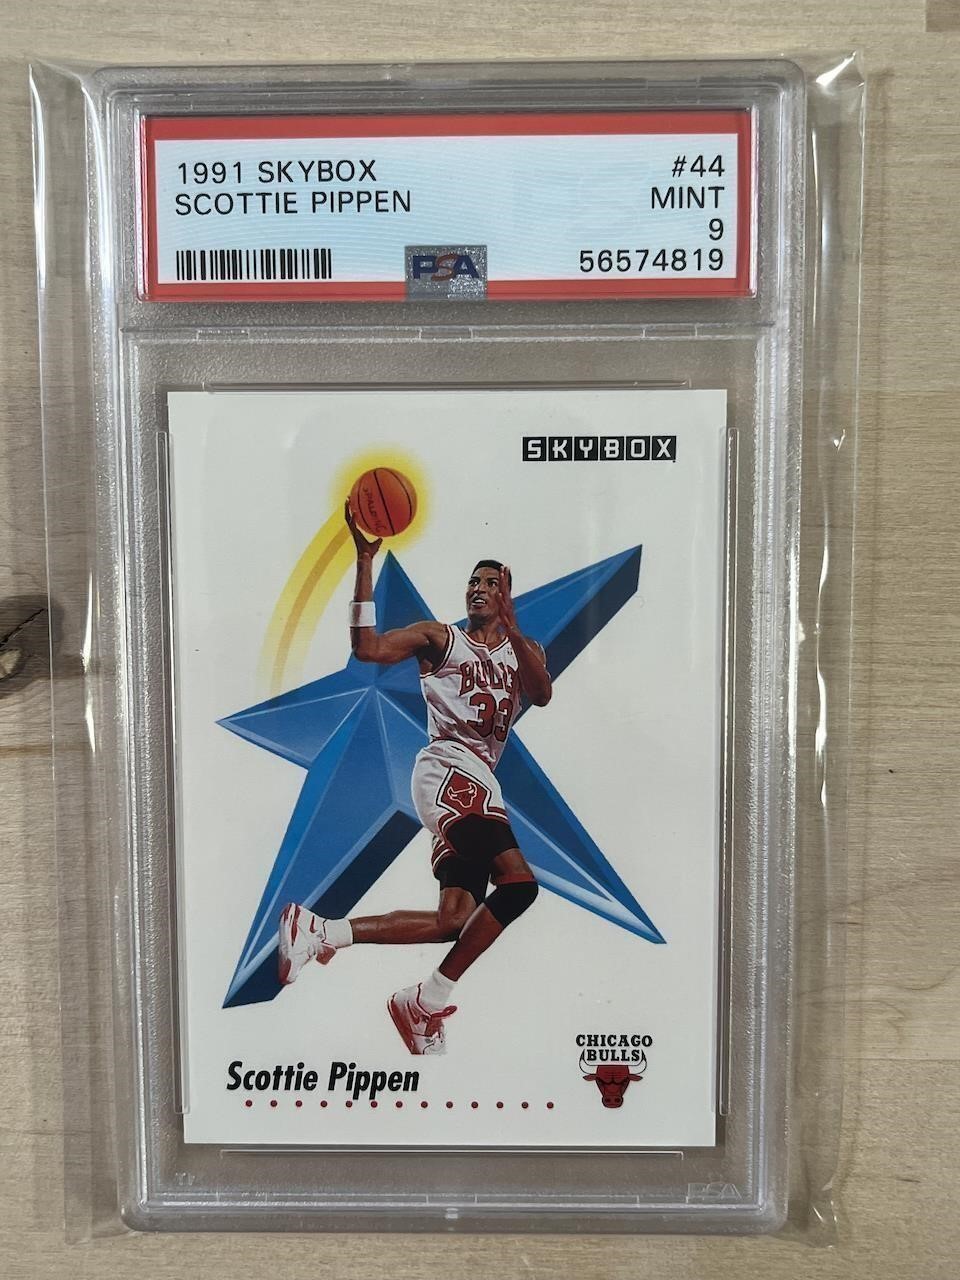 7/03/24 Graded Sports Cards